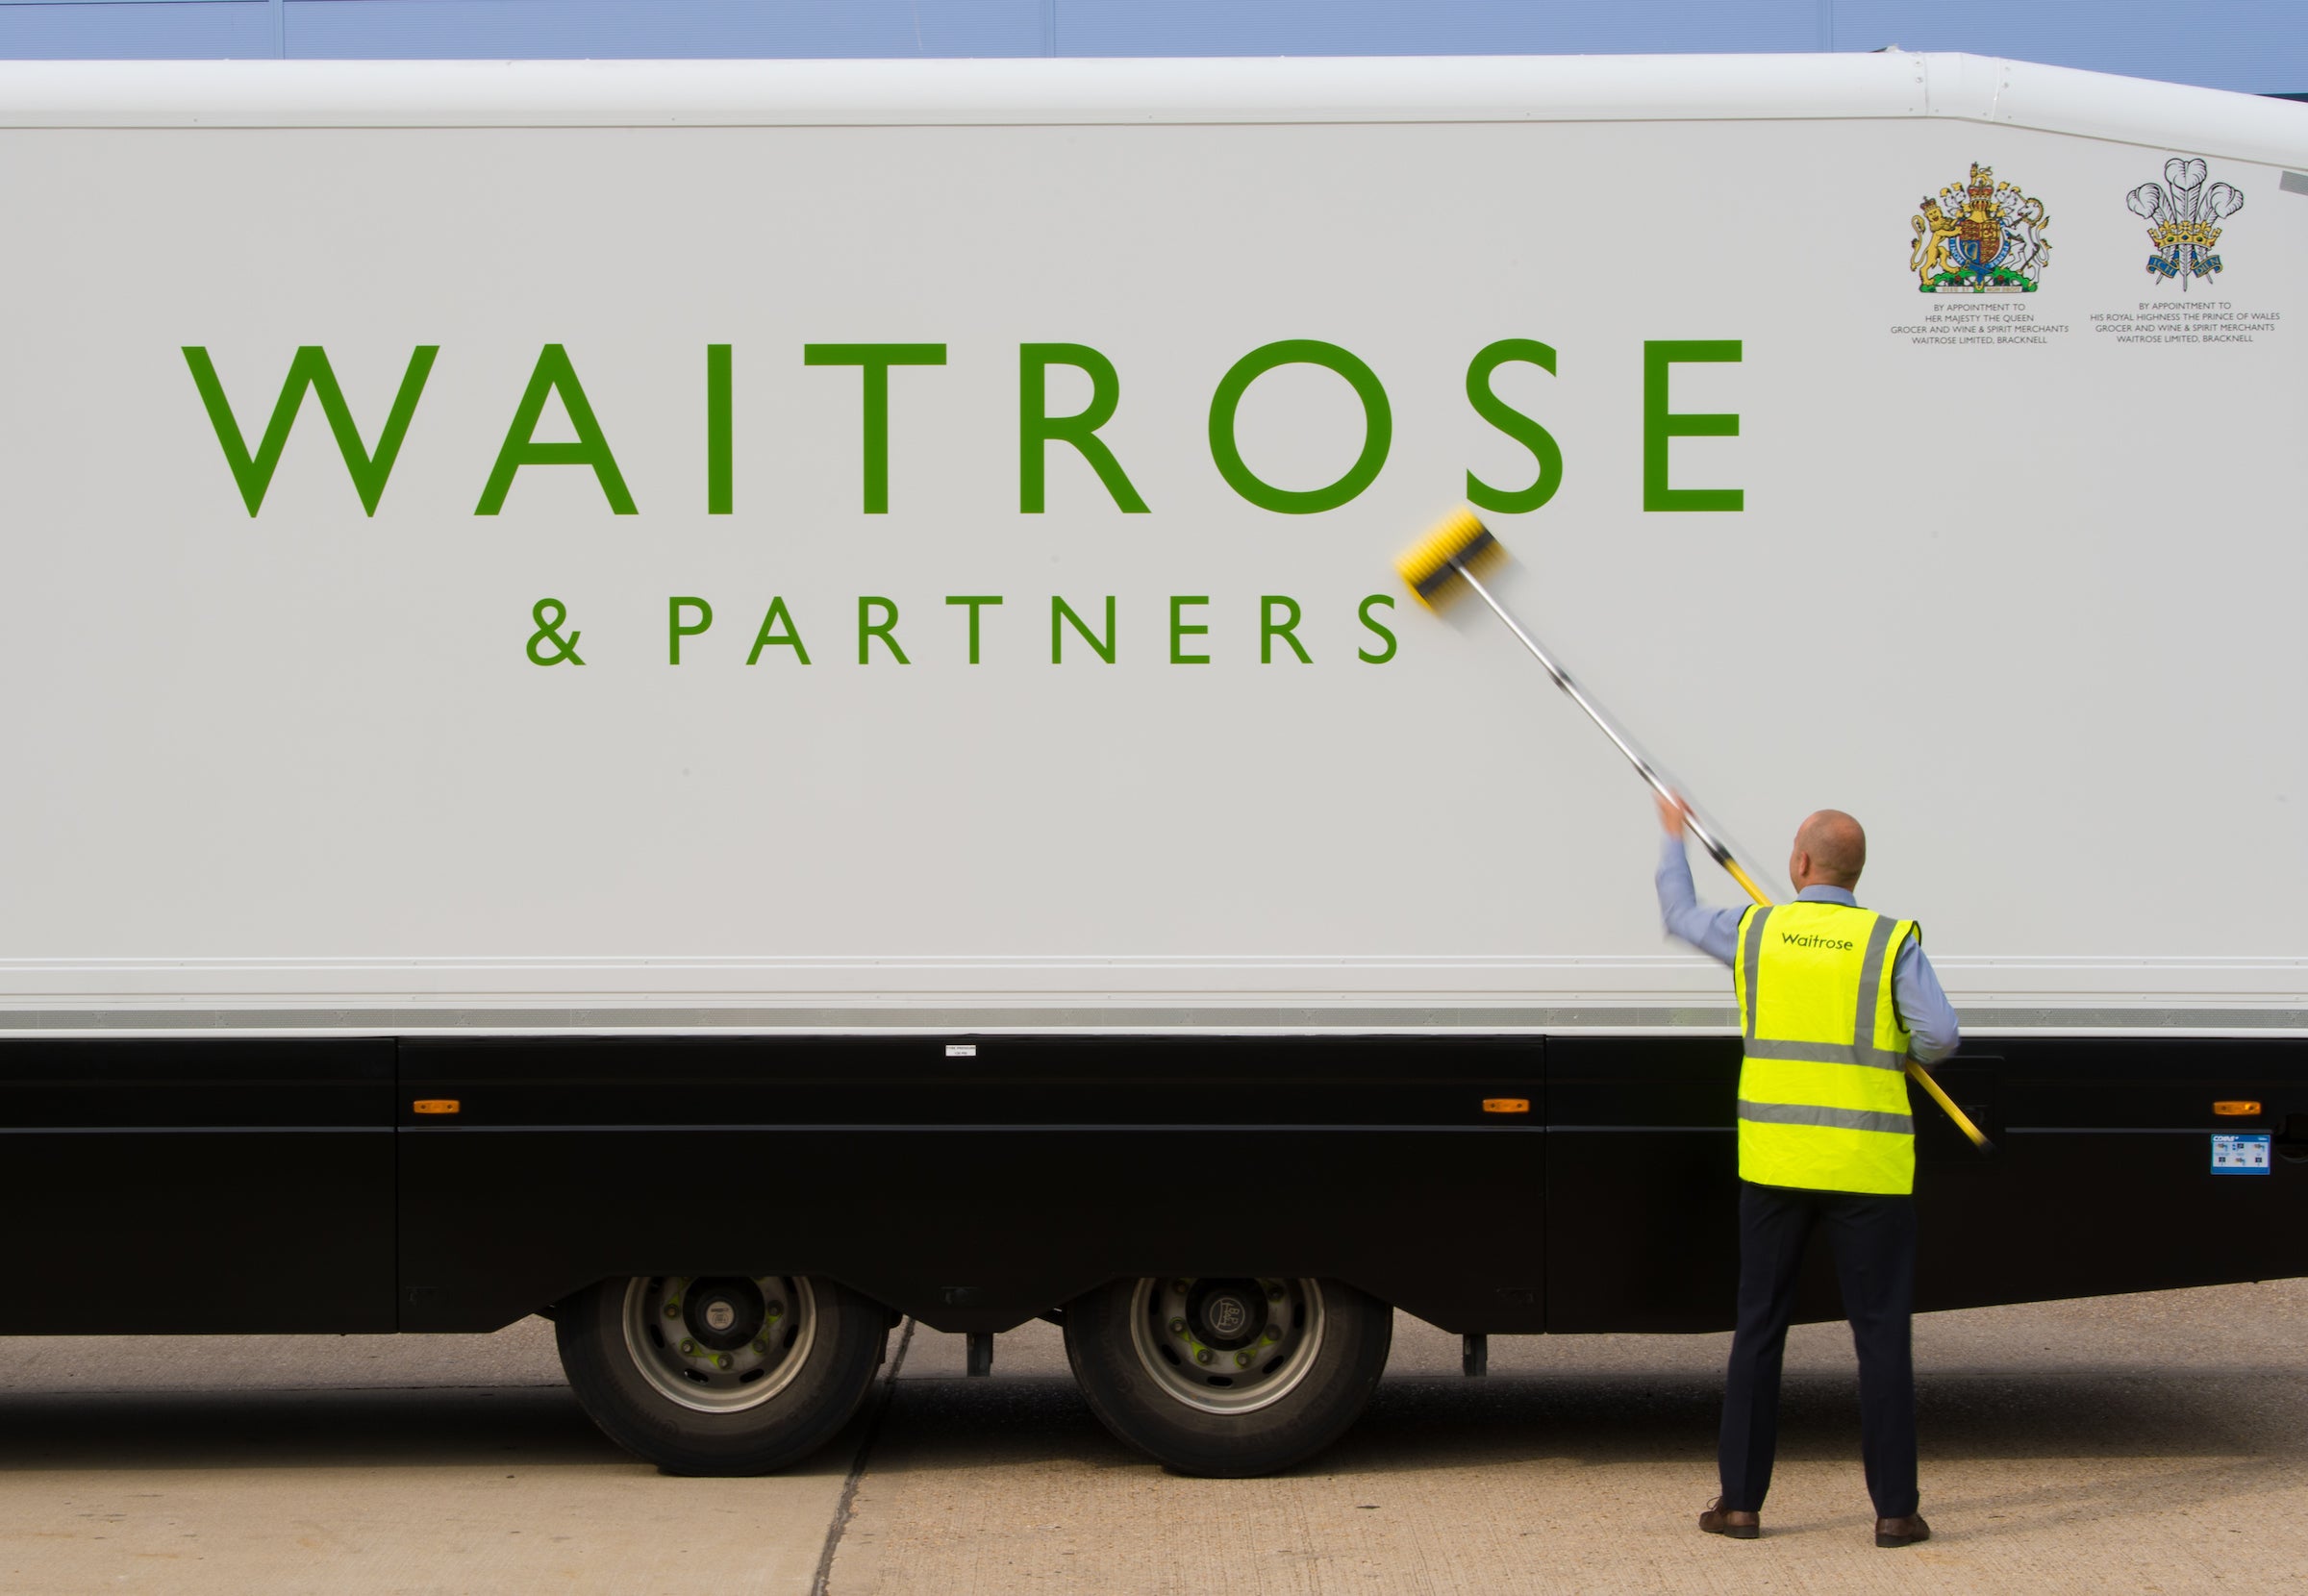 Supermarket firm Waitrose has admitted to signing land deals which blocked rivals from opening nearby shops (Waitrose/PA)